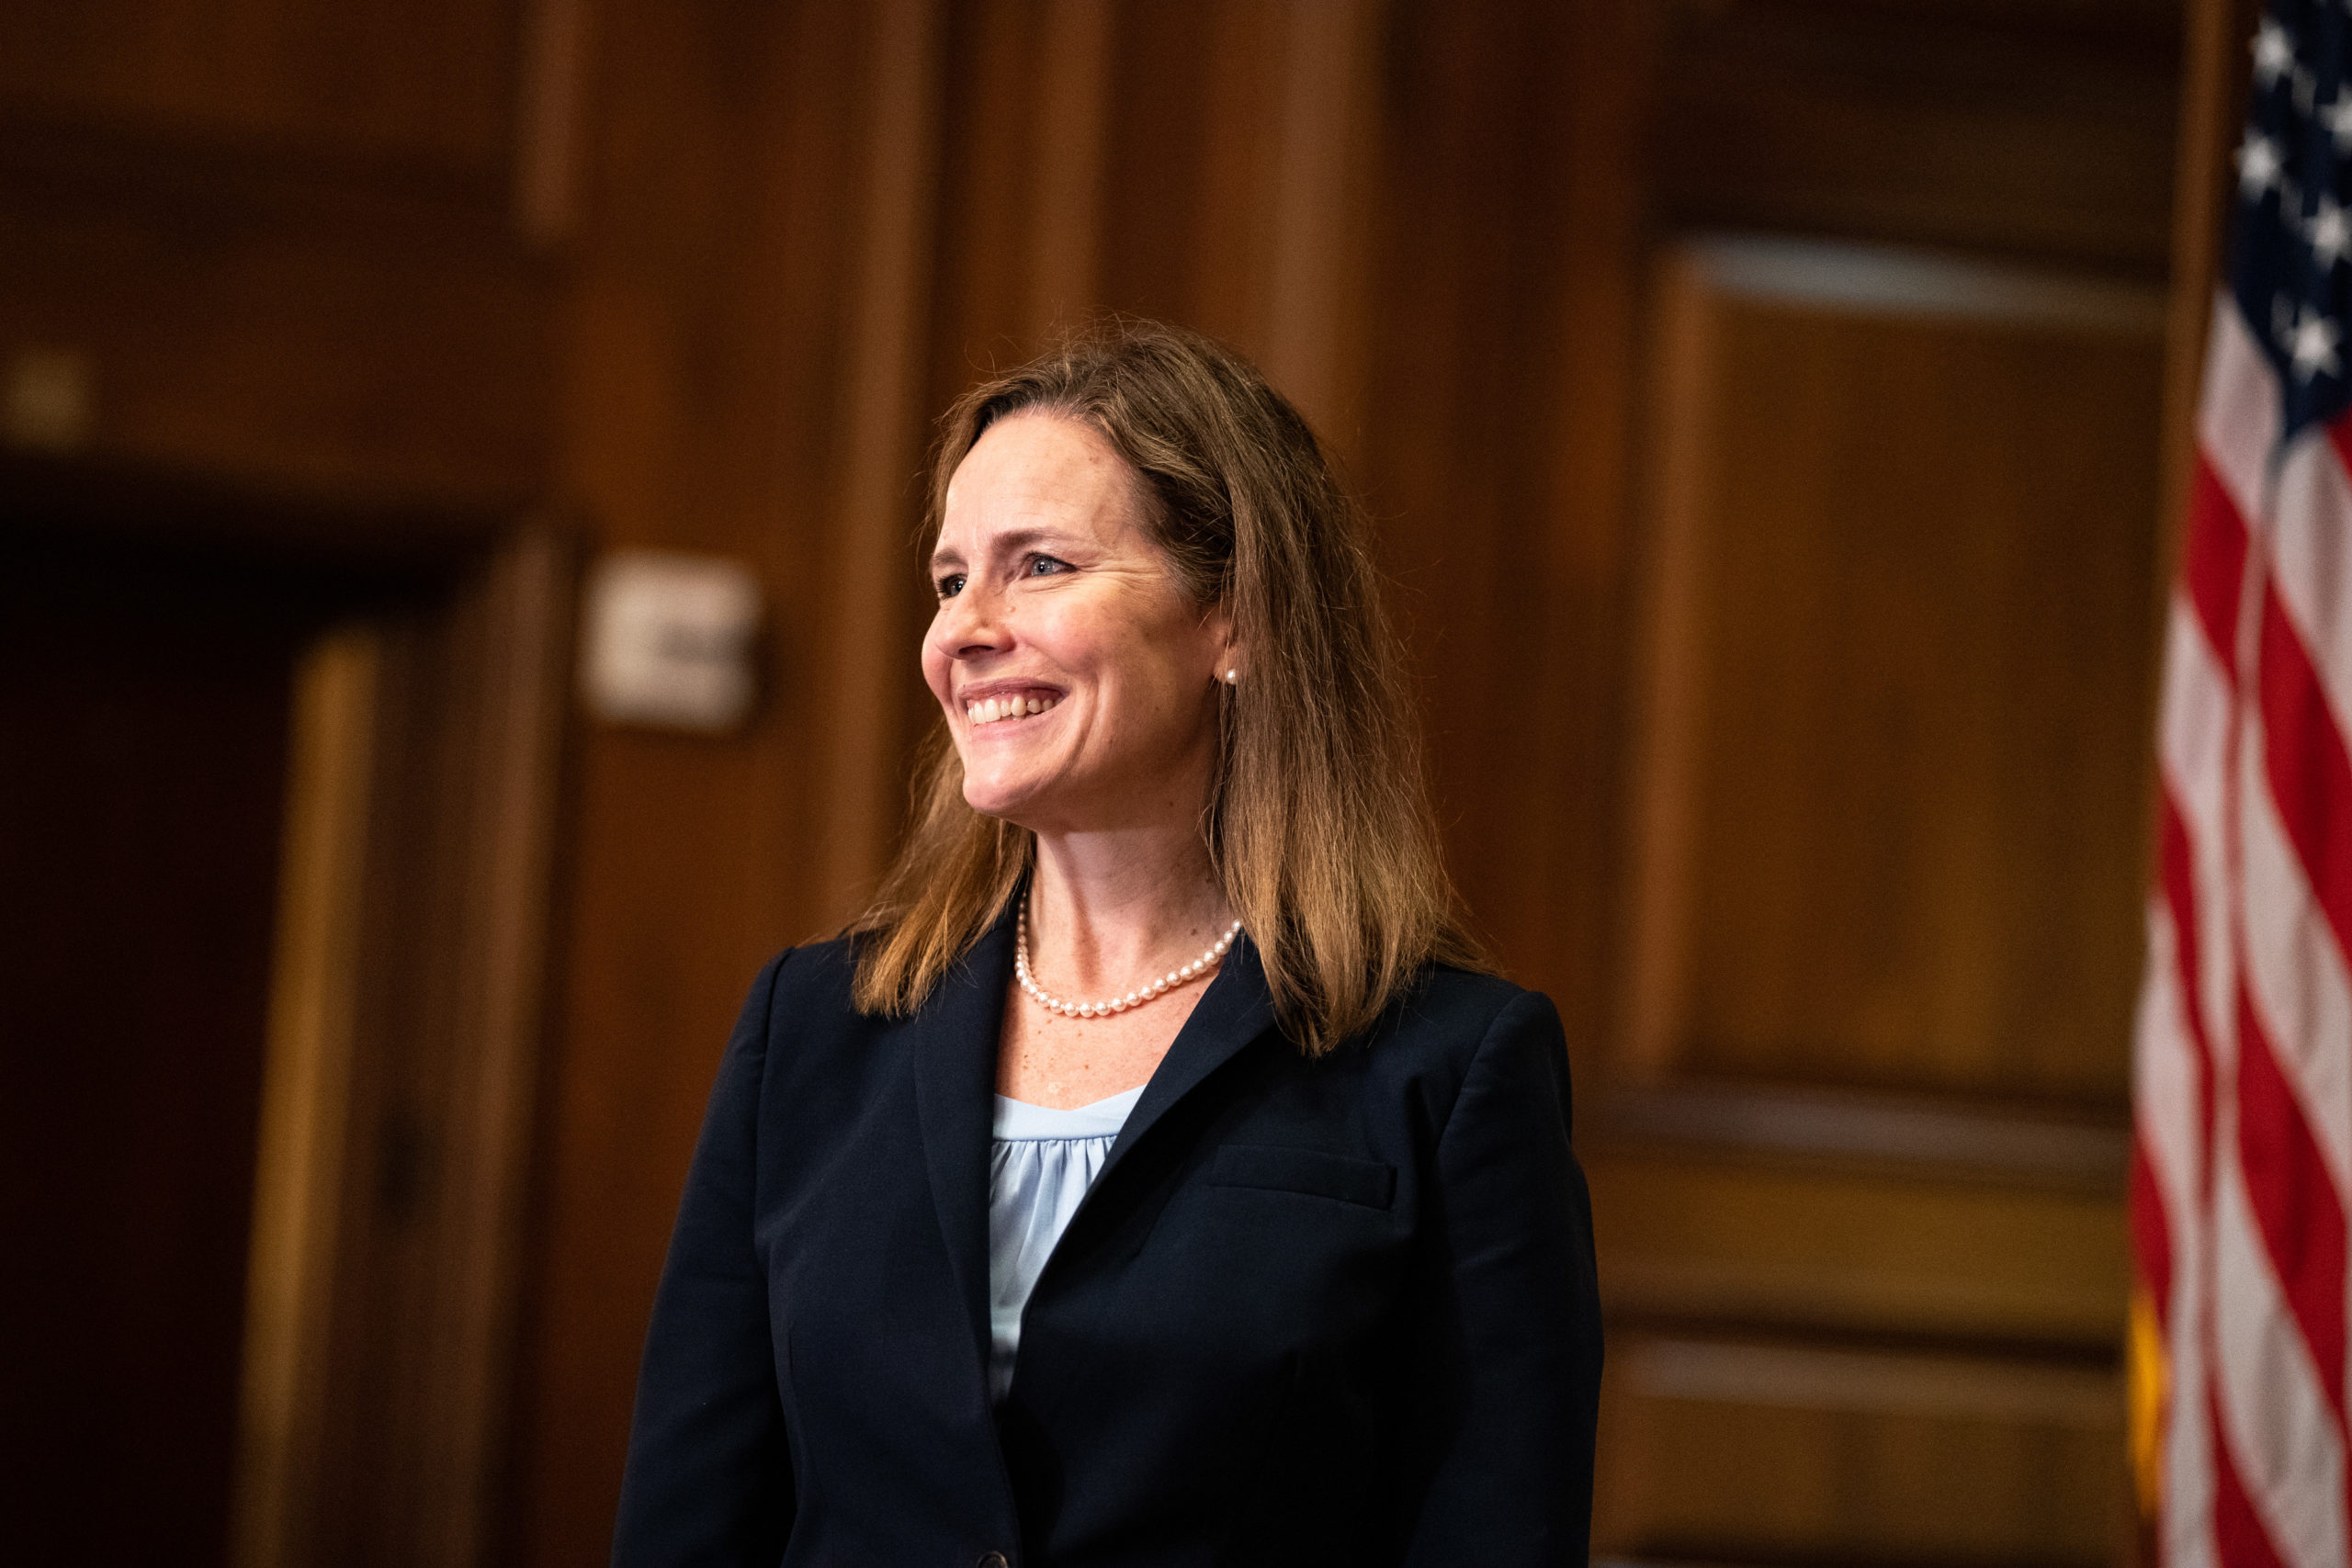 Judge Amy Coney Barrett, President Donald Trumps nominee for Supreme Court, smiles for a photo with Senator David Perdue, R-GA at the US Capitol on September 30, 2020, in Washington, DC. (Photo by Anna Moneymaker / POOL / AFP) (Photo by ANNA MONEYMAKER/POOL/AFP via Getty Images)